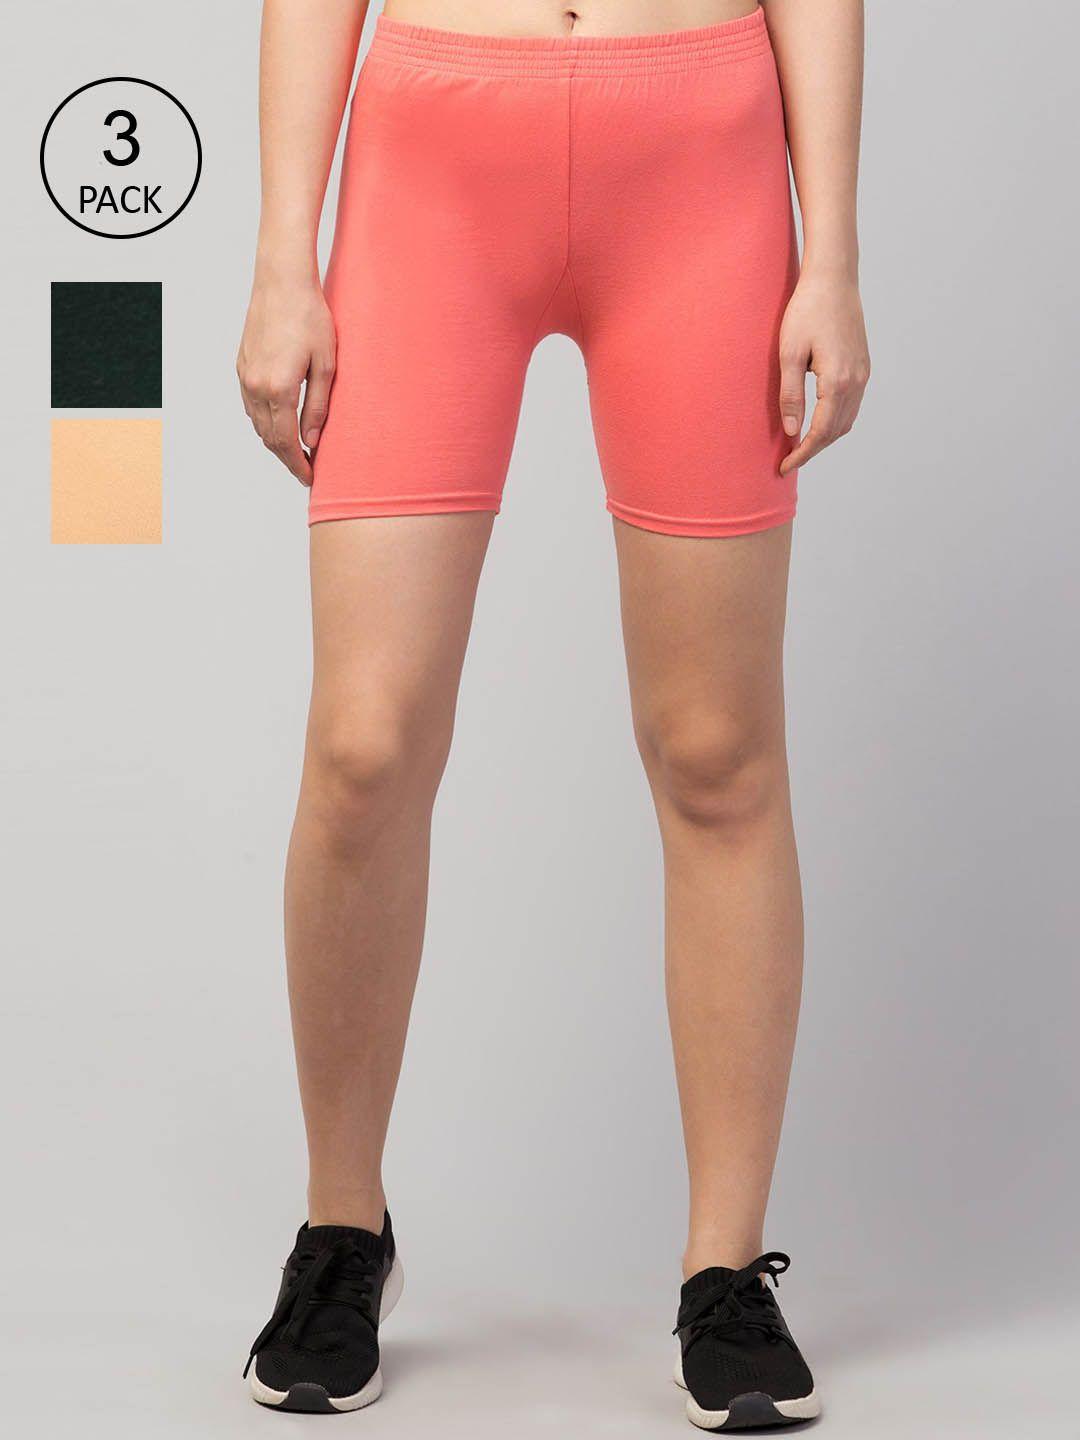 apraa-&-parma-pack-of-3-women-pink-solid-cotton-slim-fit-cycling-shorts